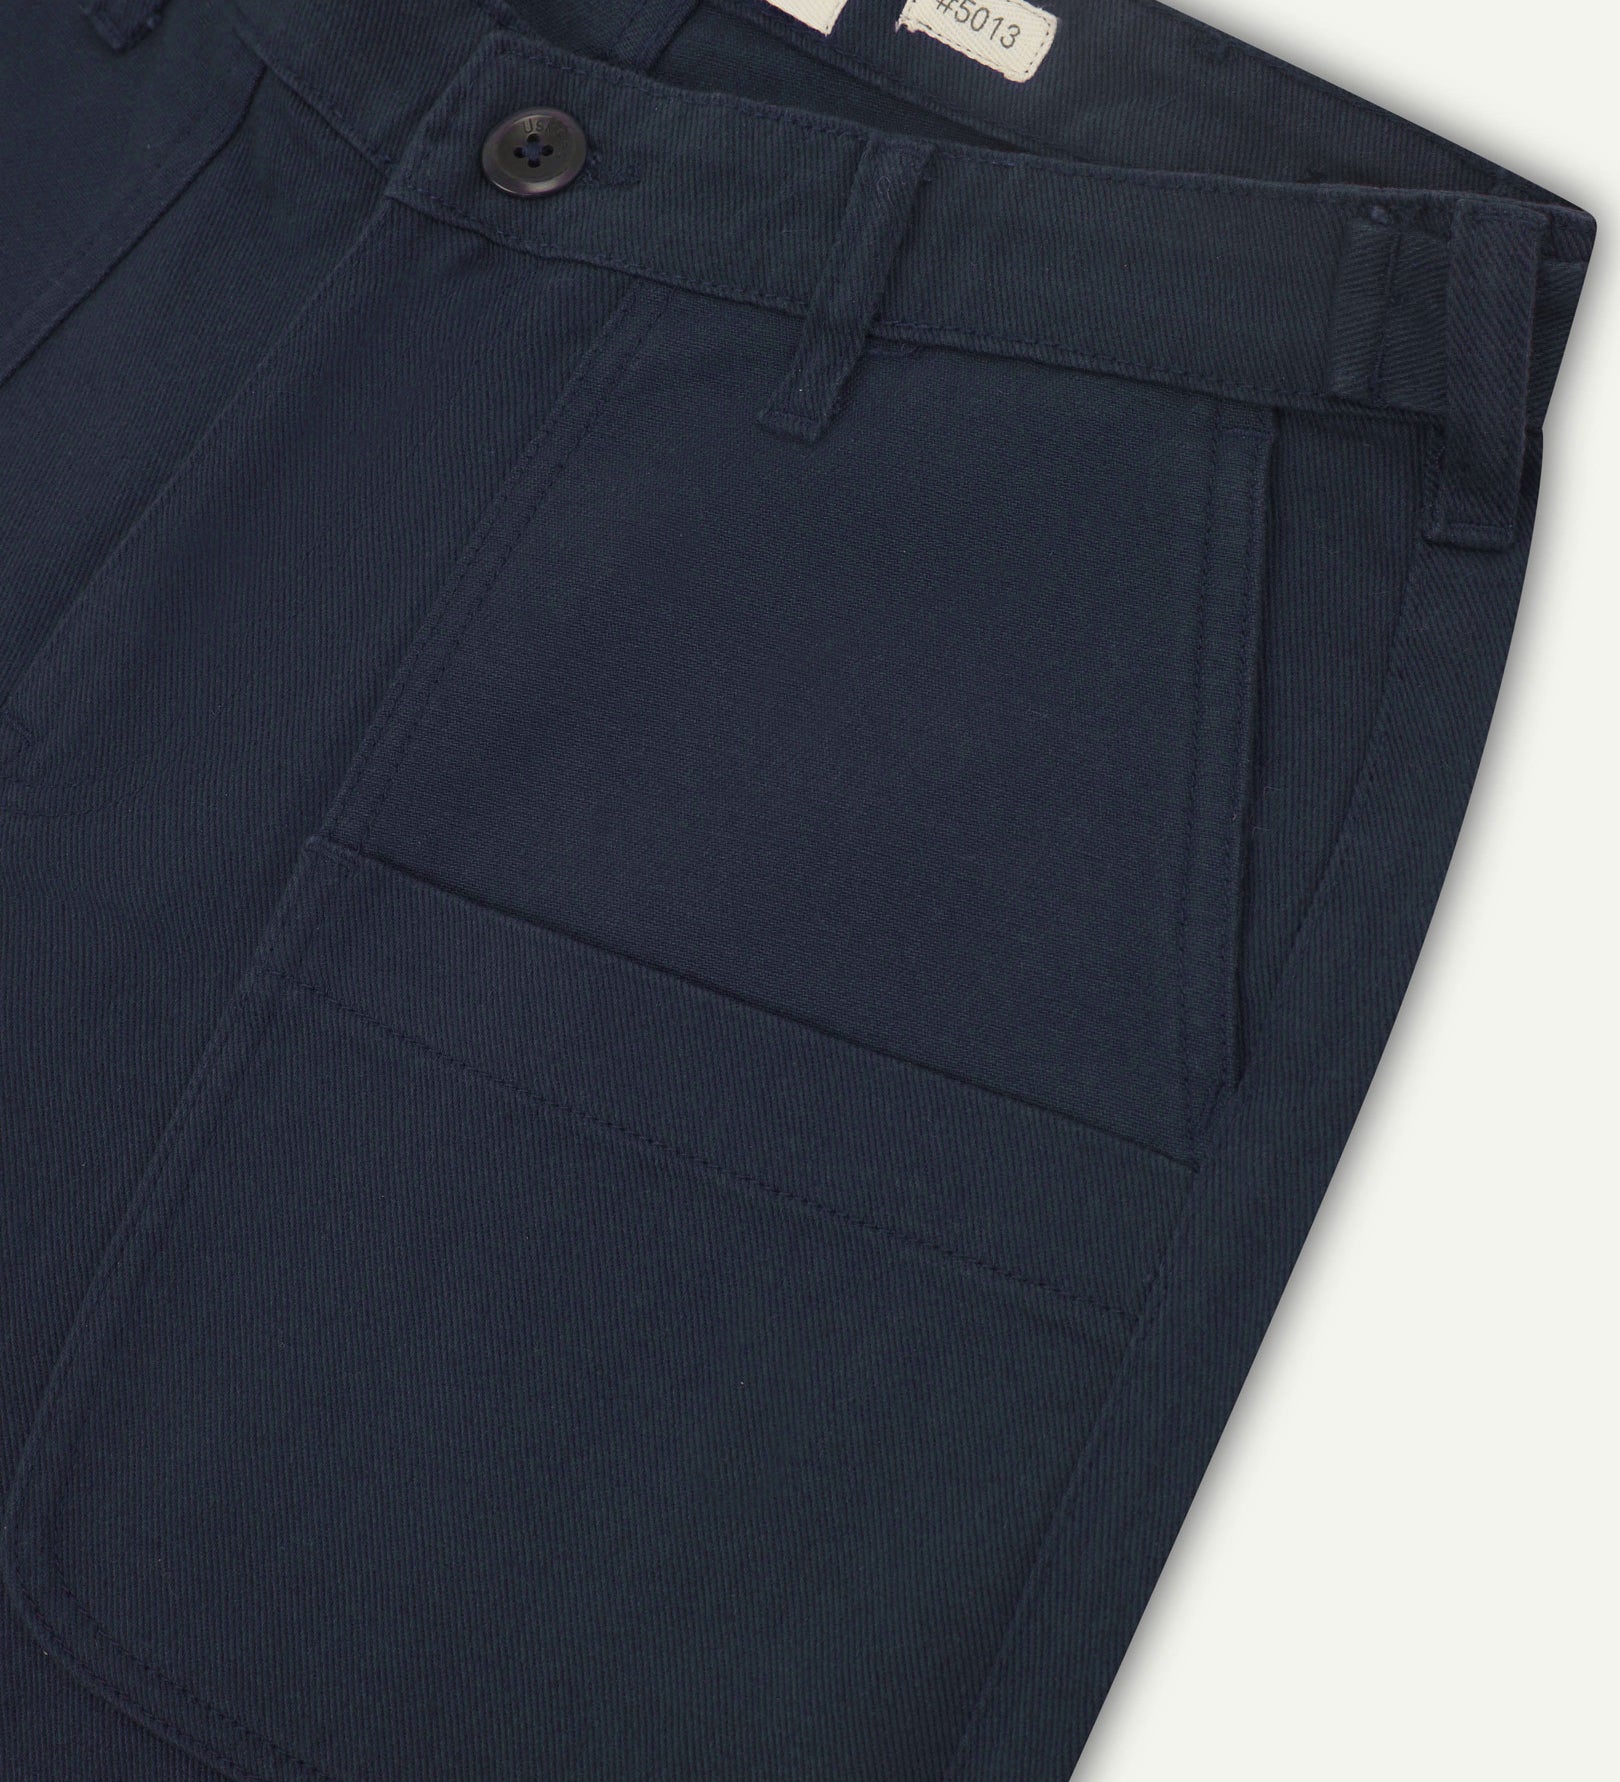 Front close-up of 5013 Uskees drill straight leg pants in dark blue, with focus on front pockets, layered pockets, belt loops waistband and Uskees branding label.